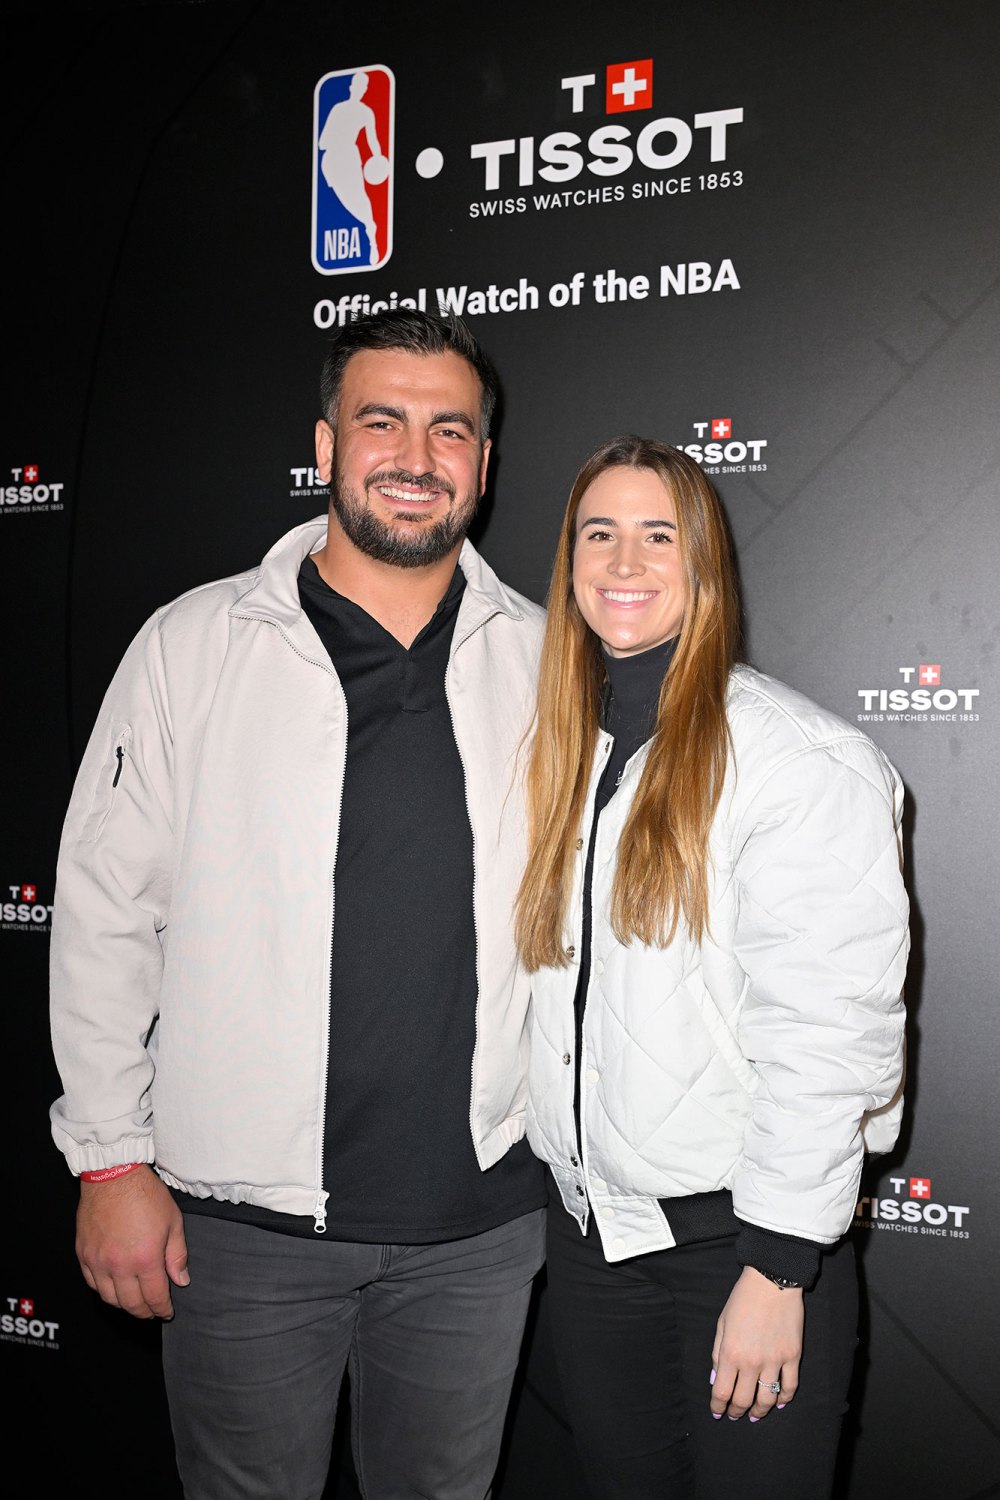 Hroniss Grasu 5 Things to Know About WNBA Star Sabrina Ionescu Before All-Star Weekend